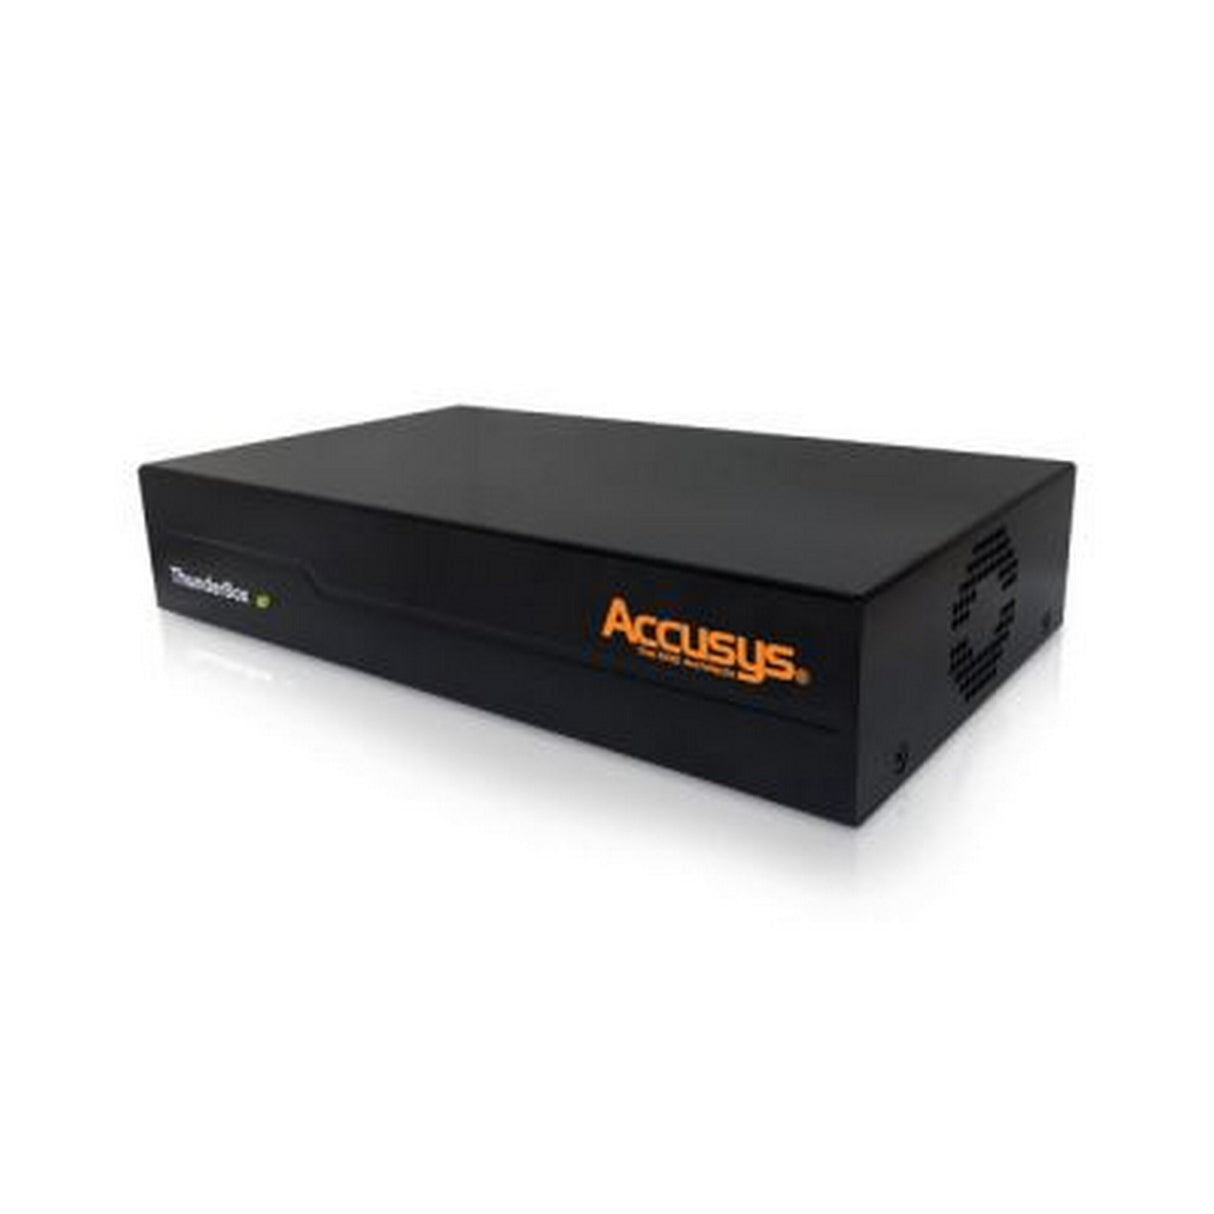 Accusys ThunderBox PCIe 3.0 Expansion Box